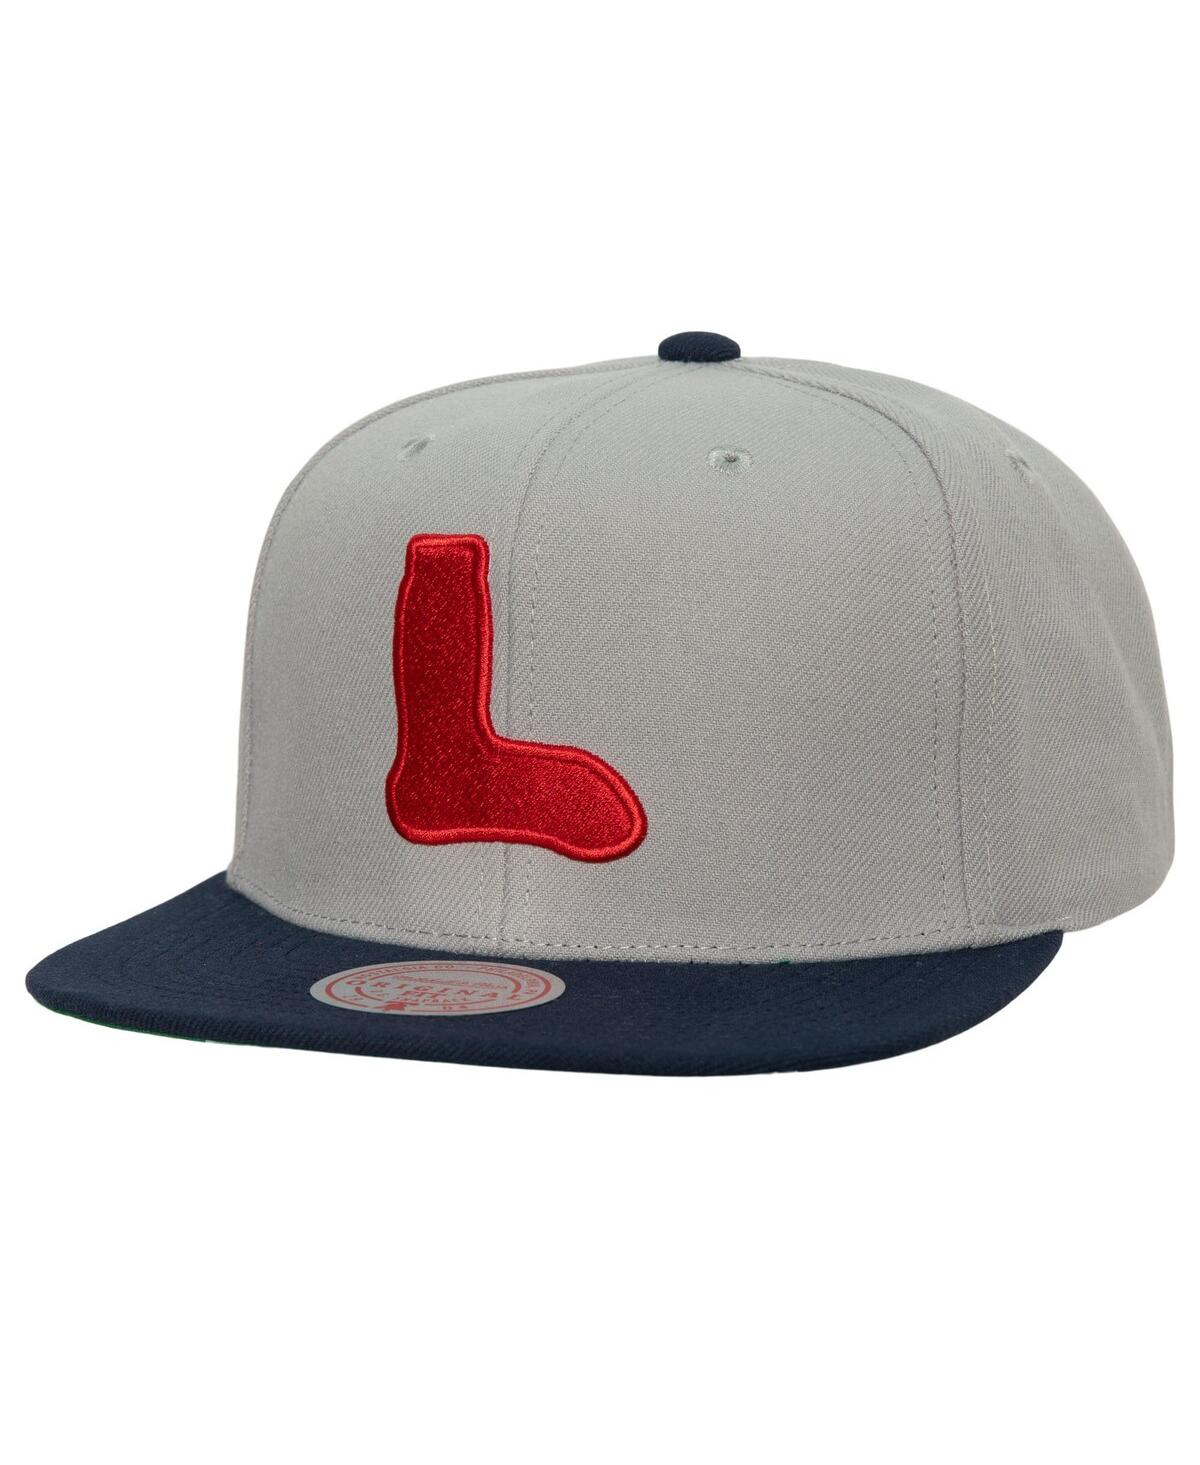 Mitchell & Ness Men's  Gray Boston Red Sox Cooperstown Collection Evergreen Snapback Hat